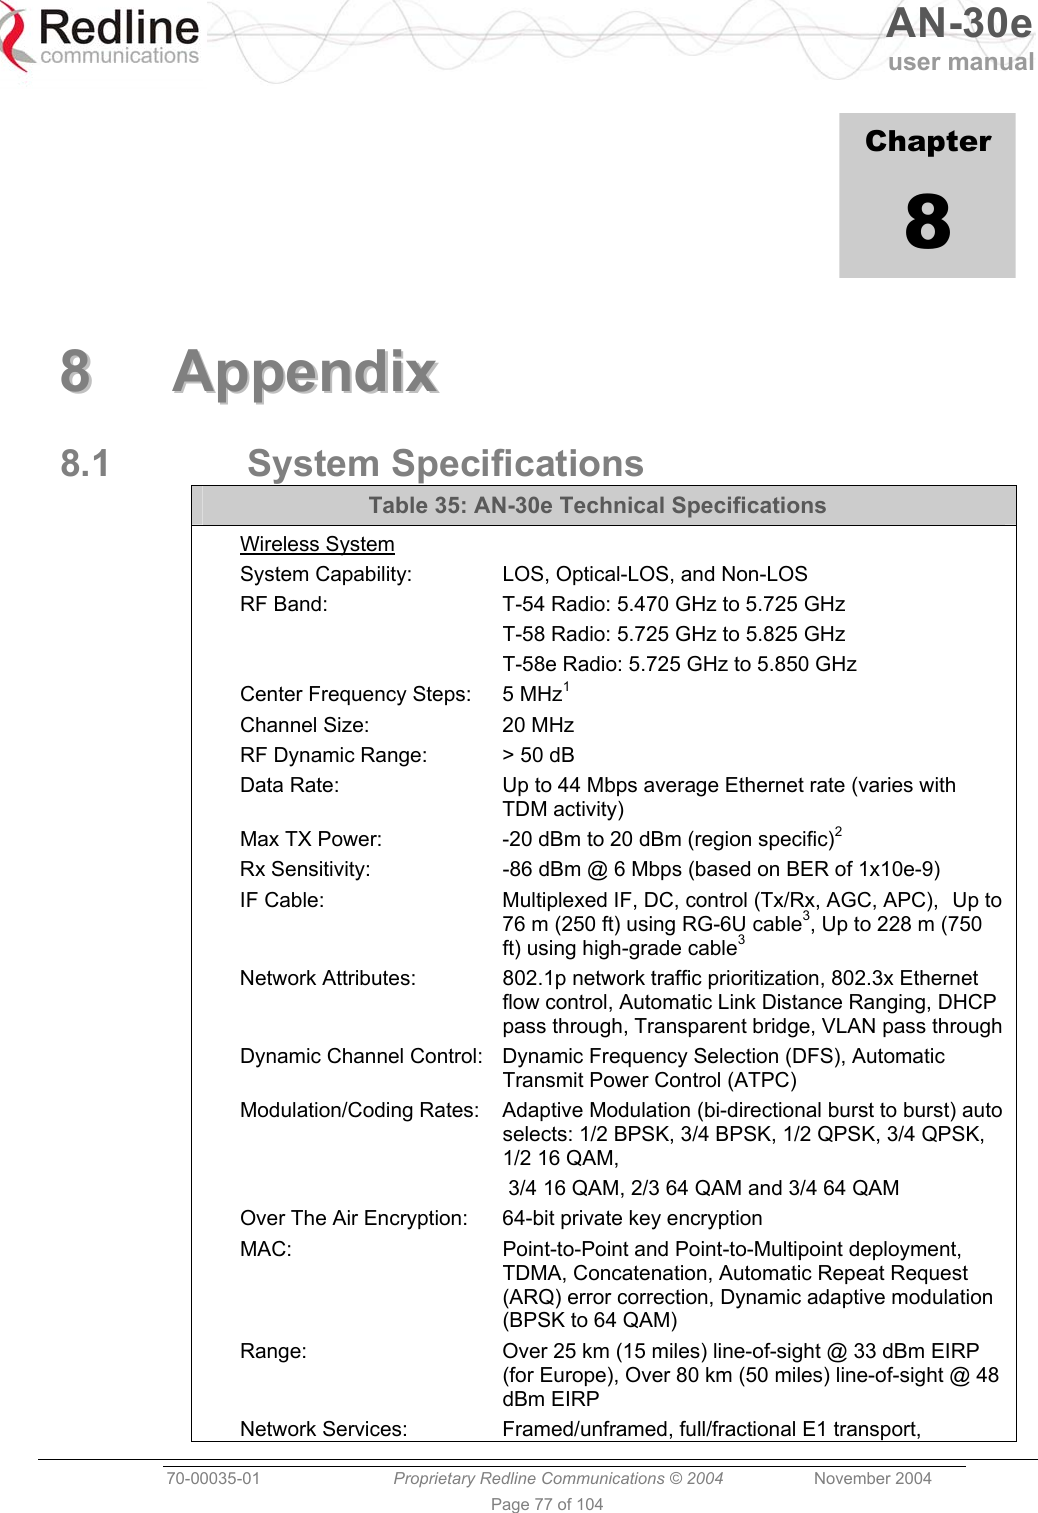   AN-30e user manual  70-00035-01  Proprietary Redline Communications © 2004 November 2004   Page 77 of 104             Chapter 8  88  AAppppeennddiixx  8.1 System Specifications Table 35: AN-30e Technical Specifications Wireless System System Capability:  LOS, Optical-LOS, and Non-LOS RF Band:  T-54 Radio: 5.470 GHz to 5.725 GHz   T-58 Radio: 5.725 GHz to 5.825 GHz   T-58e Radio: 5.725 GHz to 5.850 GHz Center Frequency Steps:  5 MHz1 Channel Size:  20 MHz RF Dynamic Range:  &gt; 50 dB Data Rate:  Up to 44 Mbps average Ethernet rate (varies with TDM activity) Max TX Power:  -20 dBm to 20 dBm (region specific)2 Rx Sensitivity:  -86 dBm @ 6 Mbps (based on BER of 1x10e-9) IF Cable:  Multiplexed IF, DC, control (Tx/Rx, AGC, APC),   Up to 76 m (250 ft) using RG-6U cable3, Up to 228 m (750 ft) using high-grade cable3 Network Attributes:  802.1p network traffic prioritization, 802.3x Ethernet flow control, Automatic Link Distance Ranging, DHCP pass through, Transparent bridge, VLAN pass through Dynamic Channel Control:  Dynamic Frequency Selection (DFS), Automatic Transmit Power Control (ATPC) Modulation/Coding Rates:  Adaptive Modulation (bi-directional burst to burst) auto selects: 1/2 BPSK, 3/4 BPSK, 1/2 QPSK, 3/4 QPSK, 1/2 16 QAM,    3/4 16 QAM, 2/3 64 QAM and 3/4 64 QAM Over The Air Encryption:  64-bit private key encryption MAC:  Point-to-Point and Point-to-Multipoint deployment, TDMA, Concatenation, Automatic Repeat Request (ARQ) error correction, Dynamic adaptive modulation (BPSK to 64 QAM) Range:  Over 25 km (15 miles) line-of-sight @ 33 dBm EIRP (for Europe), Over 80 km (50 miles) line-of-sight @ 48 dBm EIRP Network Services:  Framed/unframed, full/fractional E1 transport, 